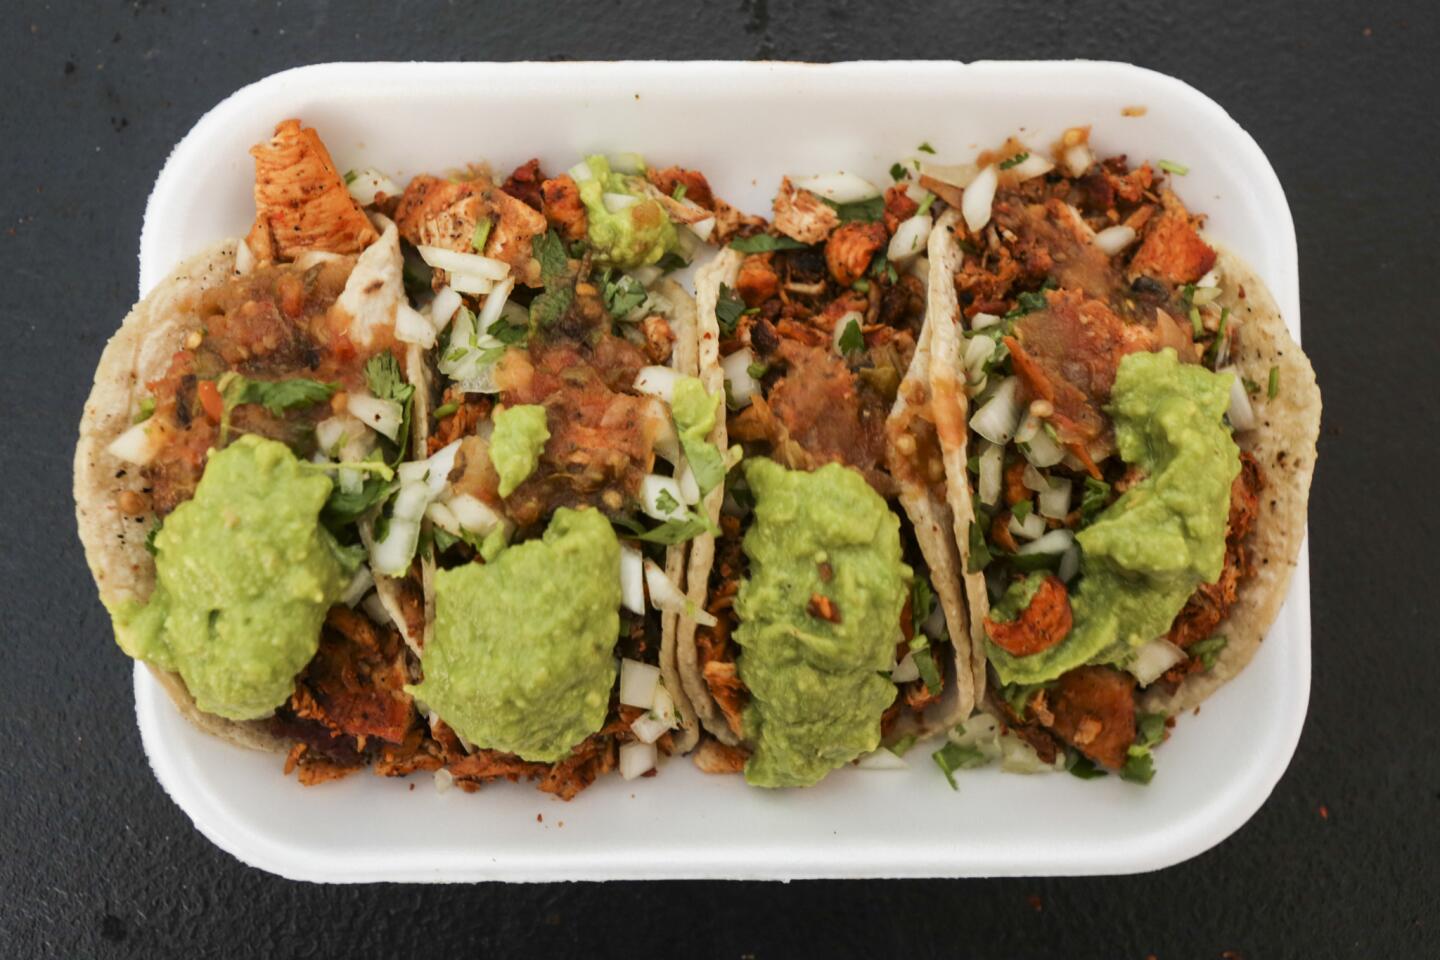 Chicken tacos with cilantro, onions and avocado from Carlos's Tijuana Tacos, a new taco vendor in Whittier.